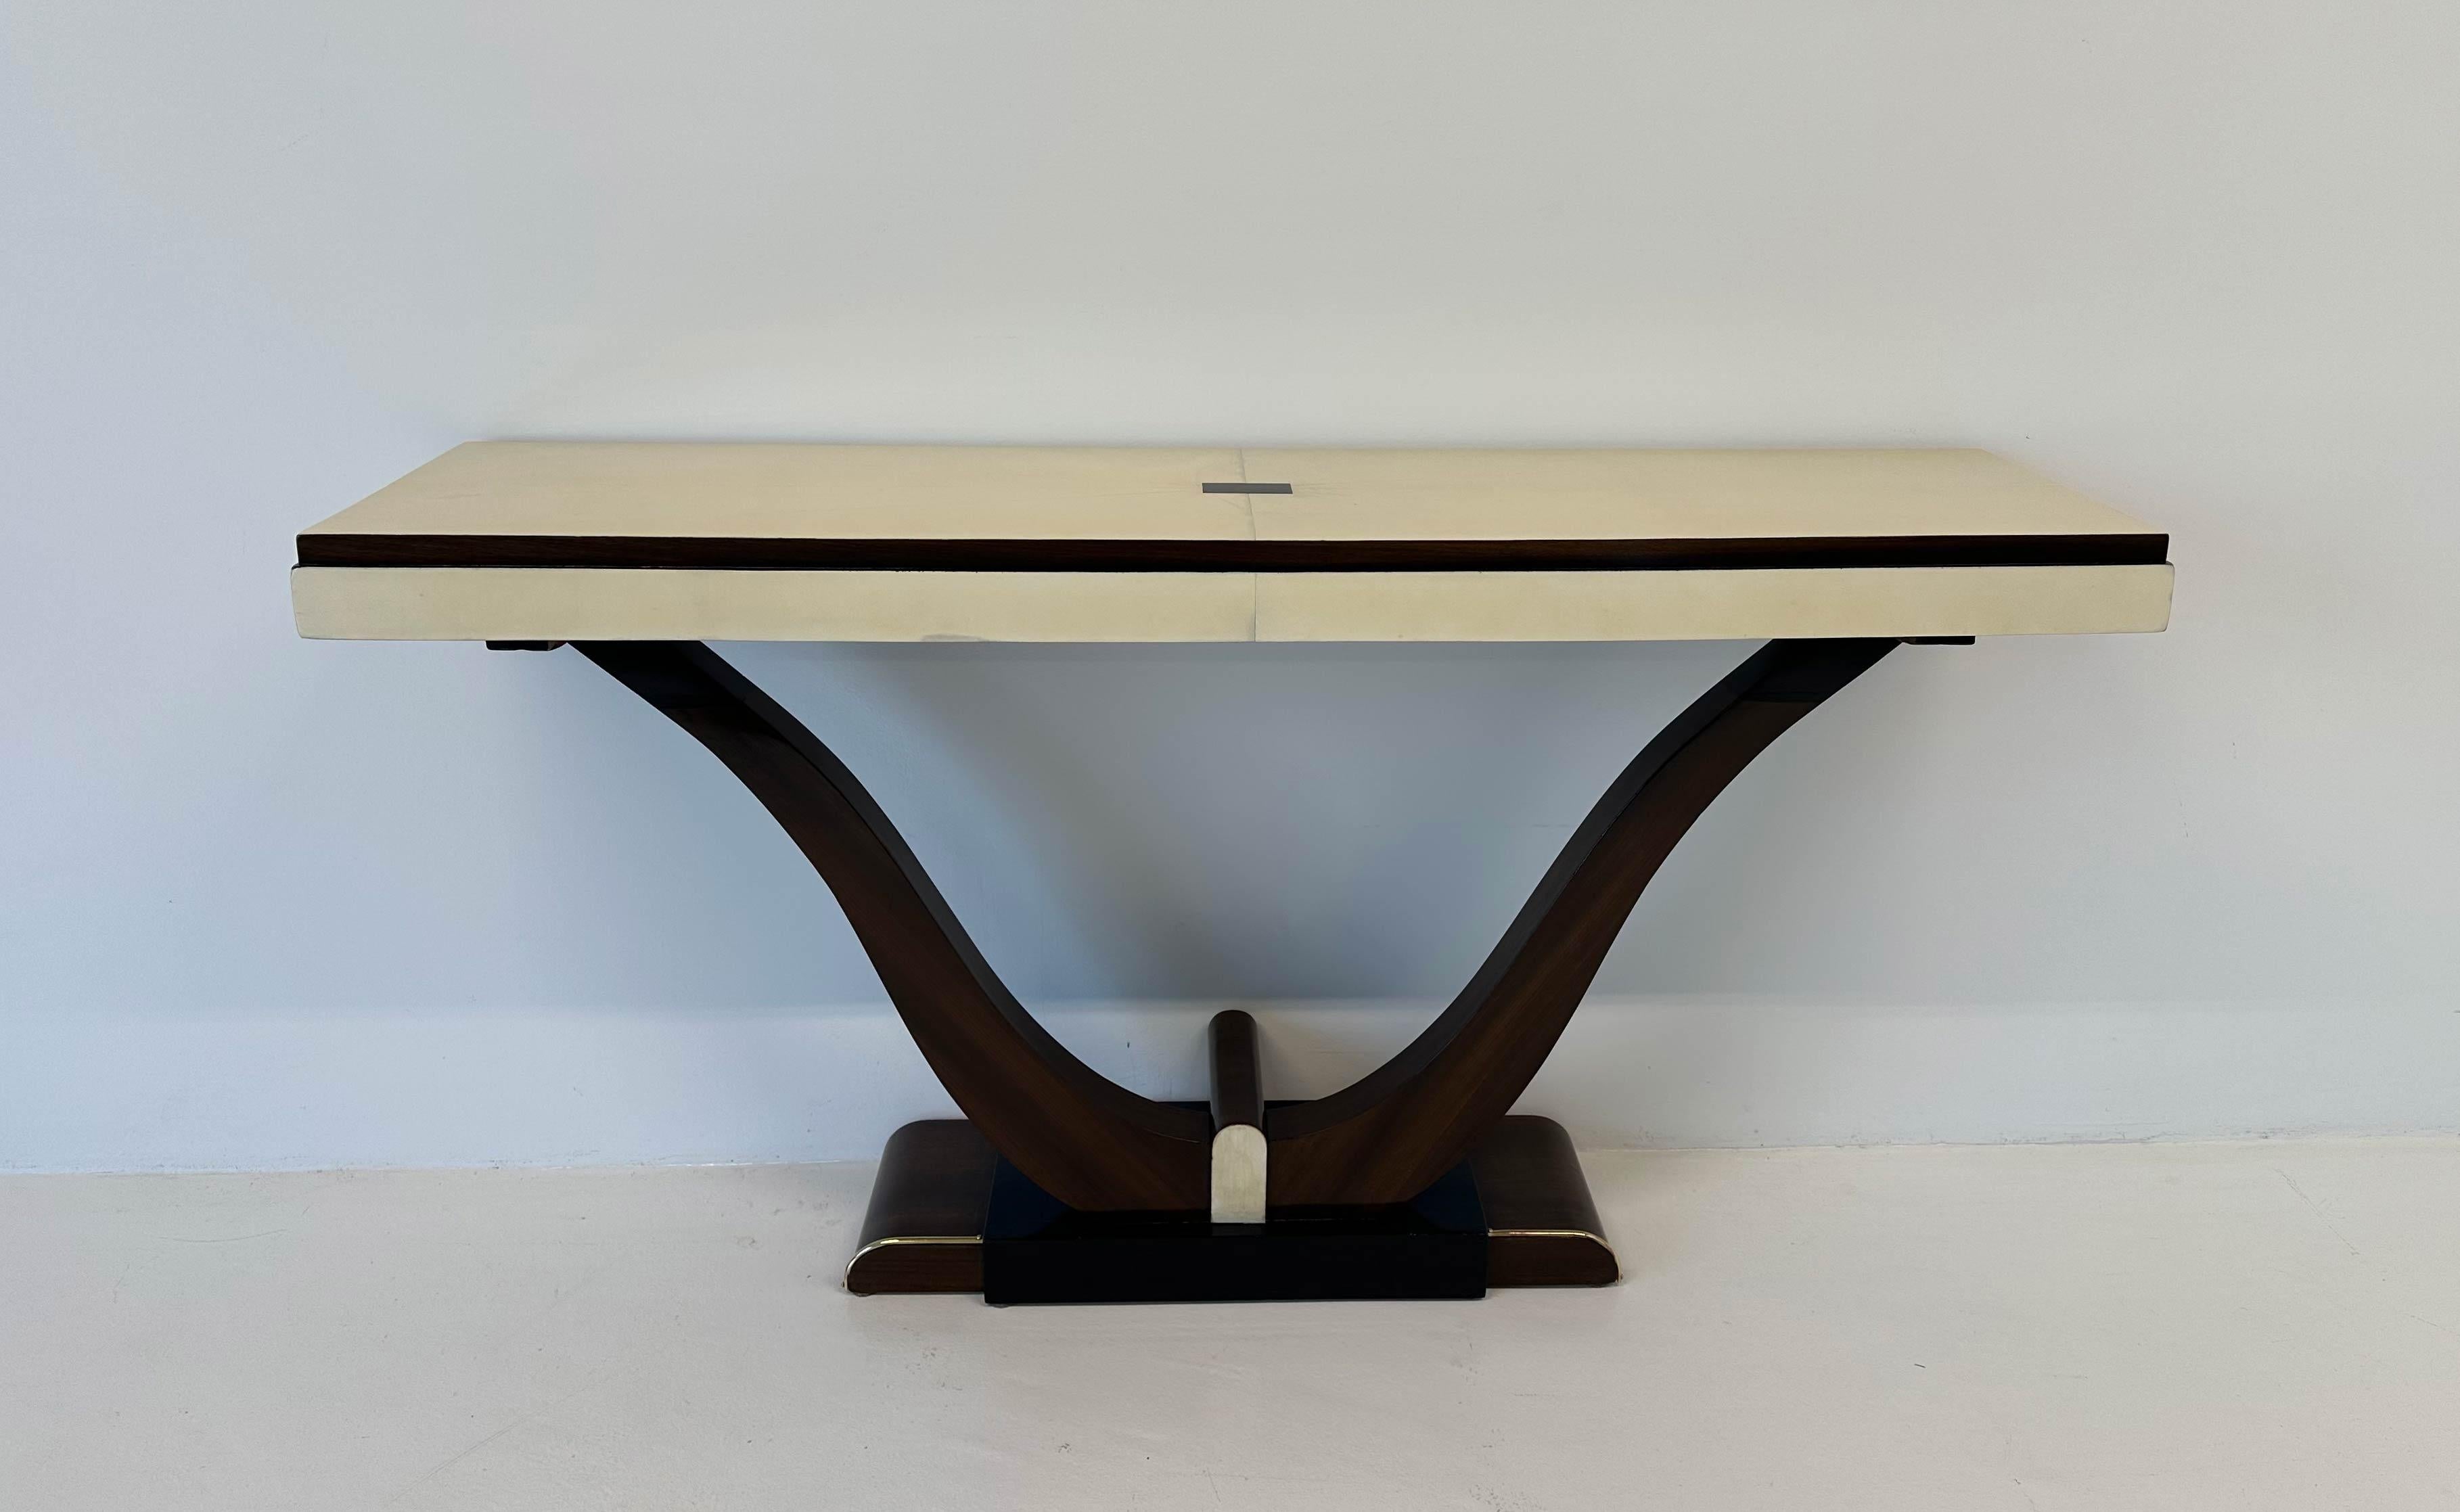 This console was produced in France in the 1930s
The top, its profile and a small decorative detail on the base are in parchment. The sinuous legs, part of the base and the rectangle on the top are in exotic wood. The other parts are black